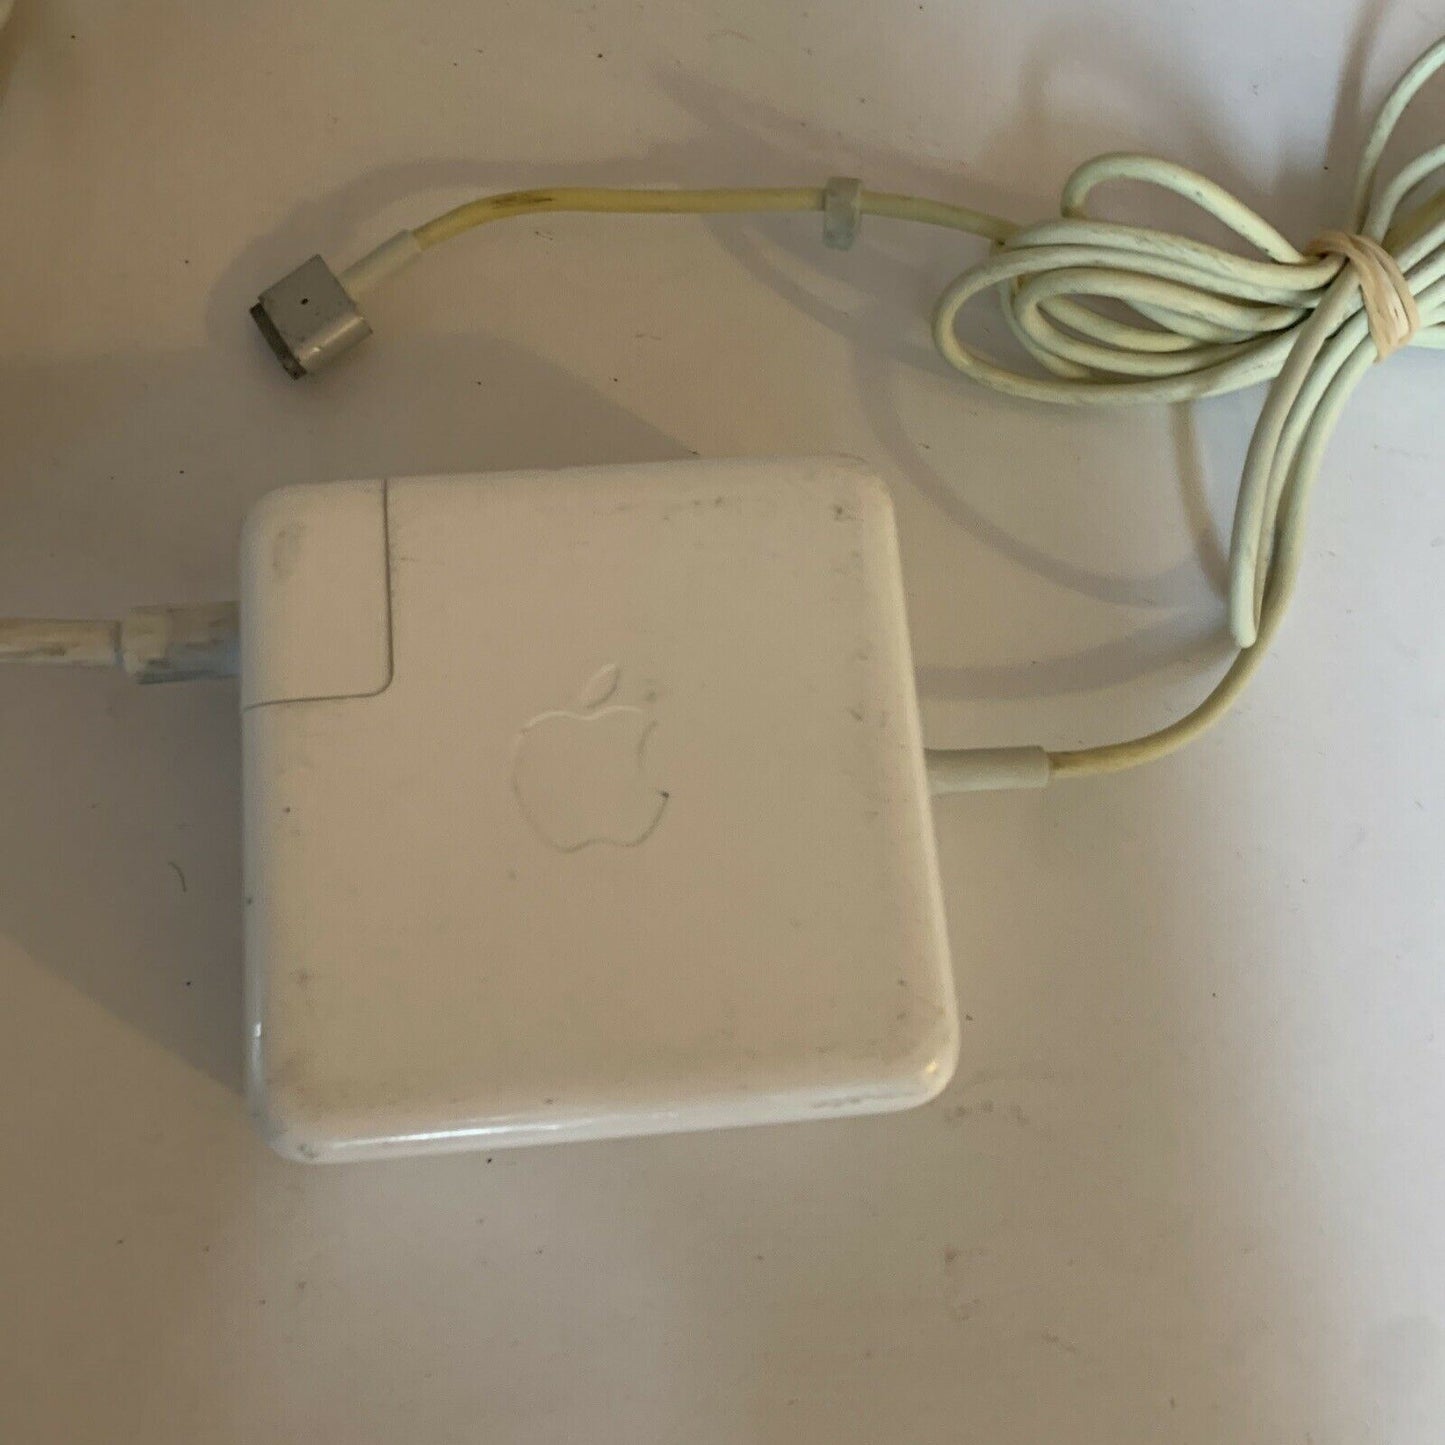 Genuine Apple Magsafe 2 Power Adapter A1424